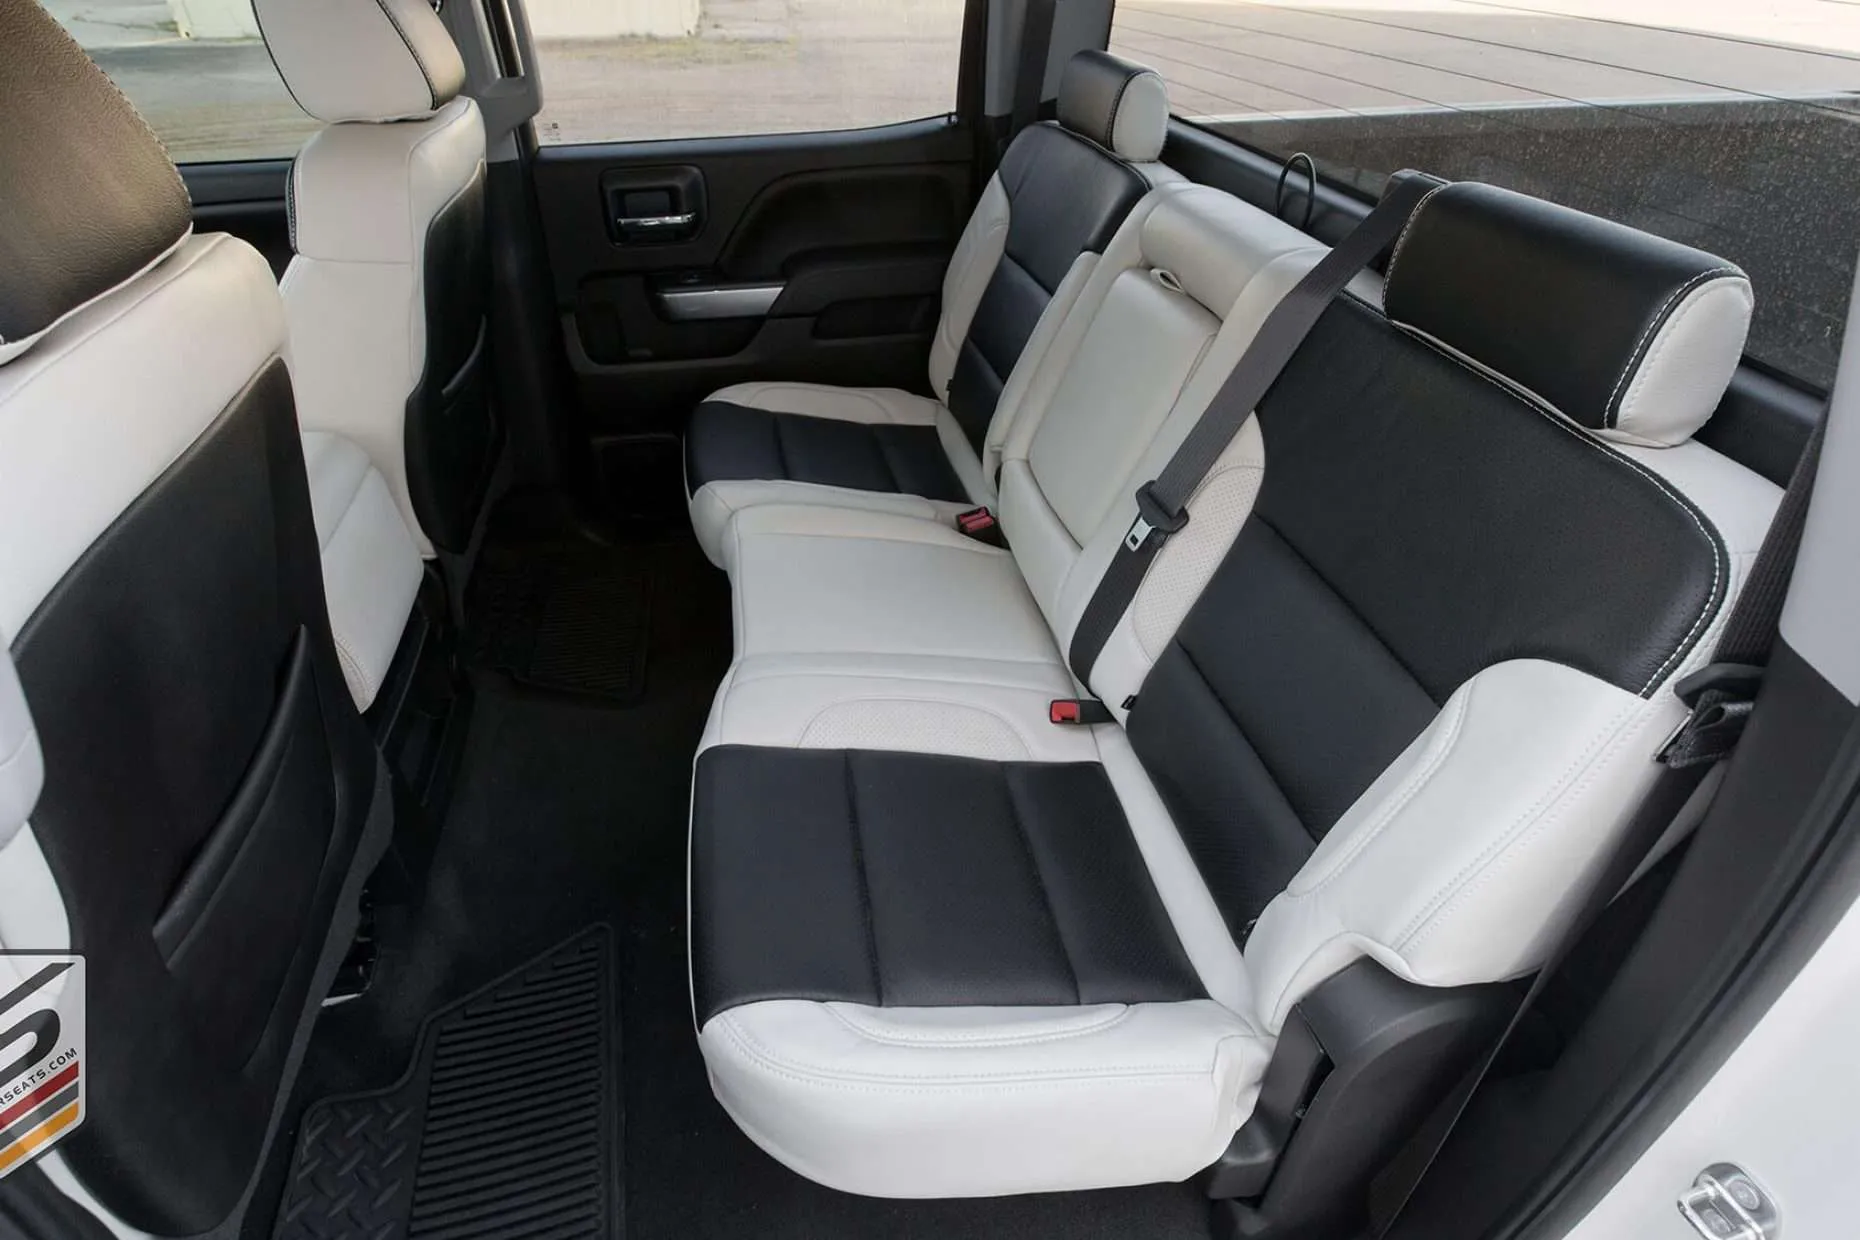 Chevrolet Silverado with custom leather interior - Rear seats from driver's side